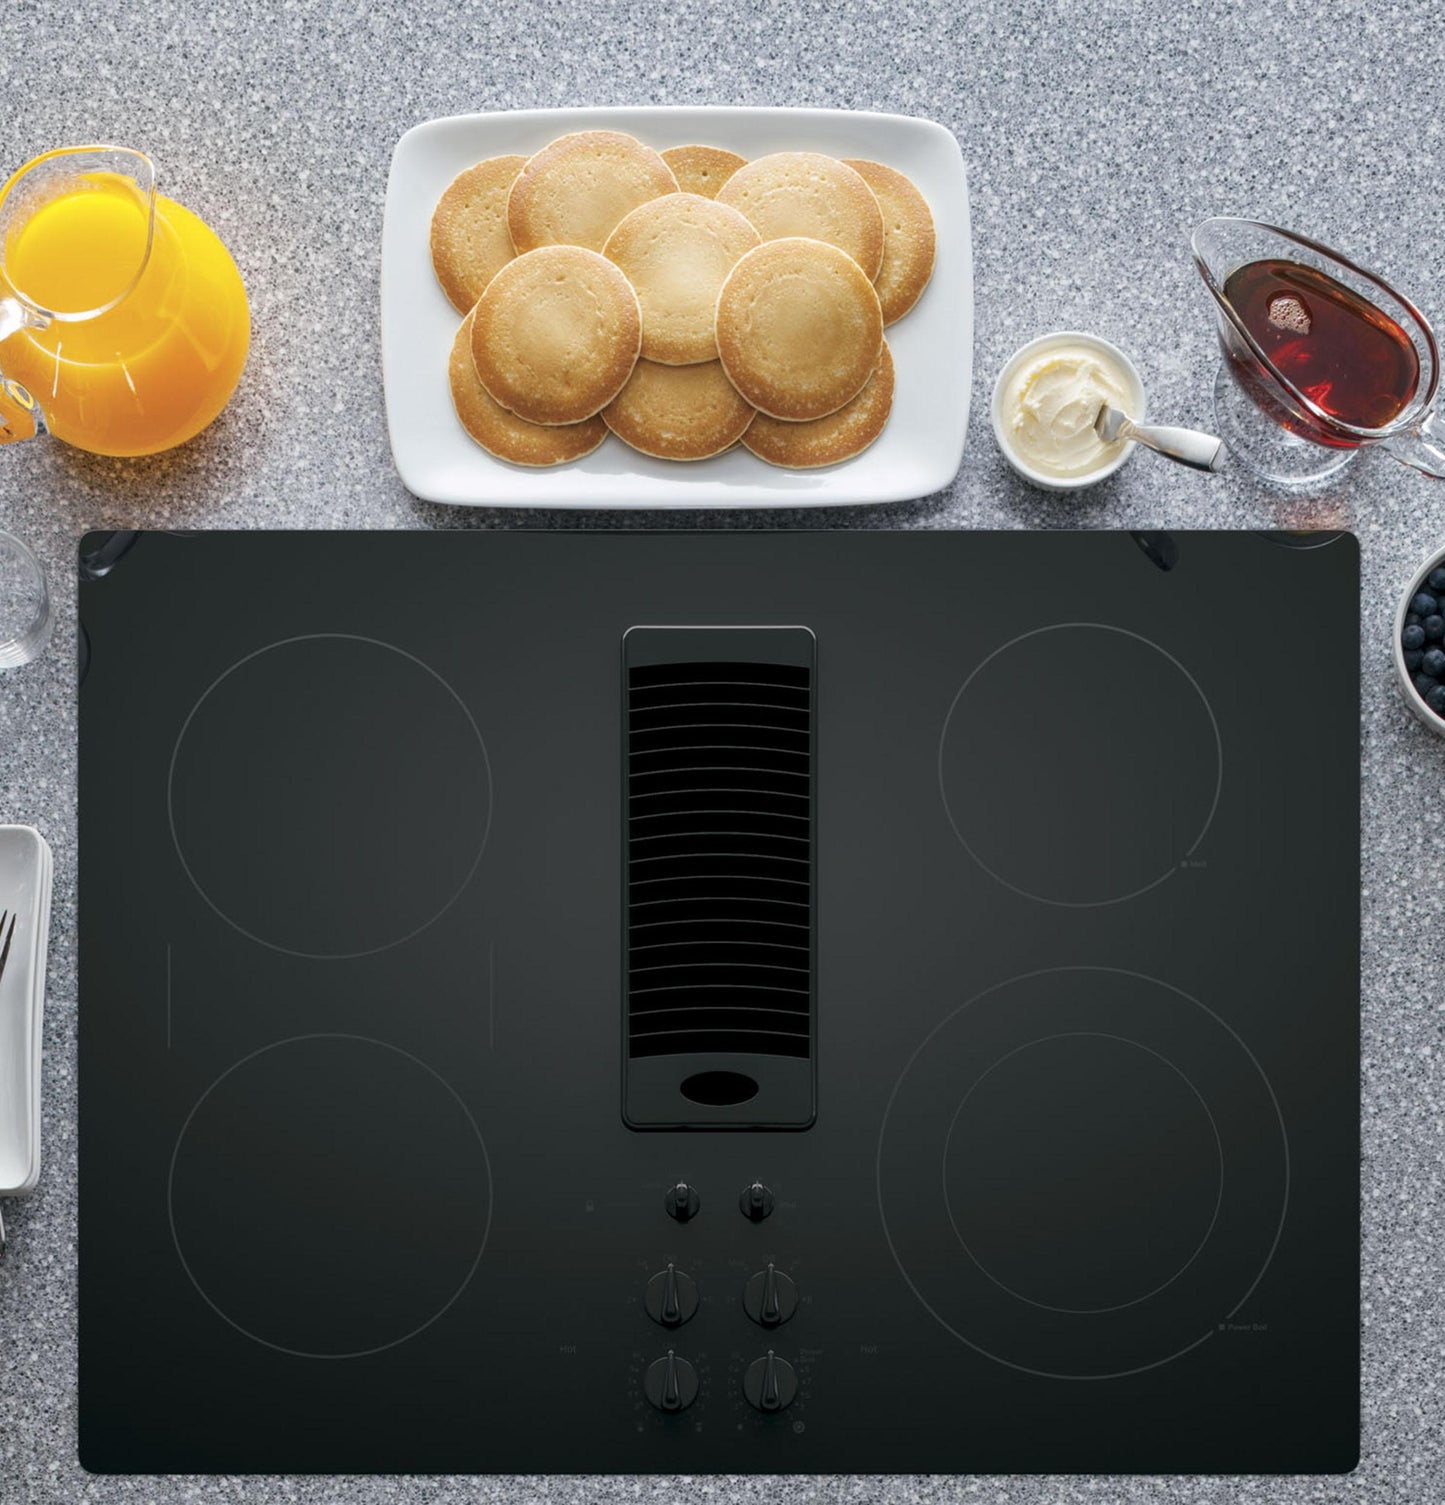 Ge Appliances PP9830DRBB Ge Profile&#8482; 30" Downdraft Electric Cooktop